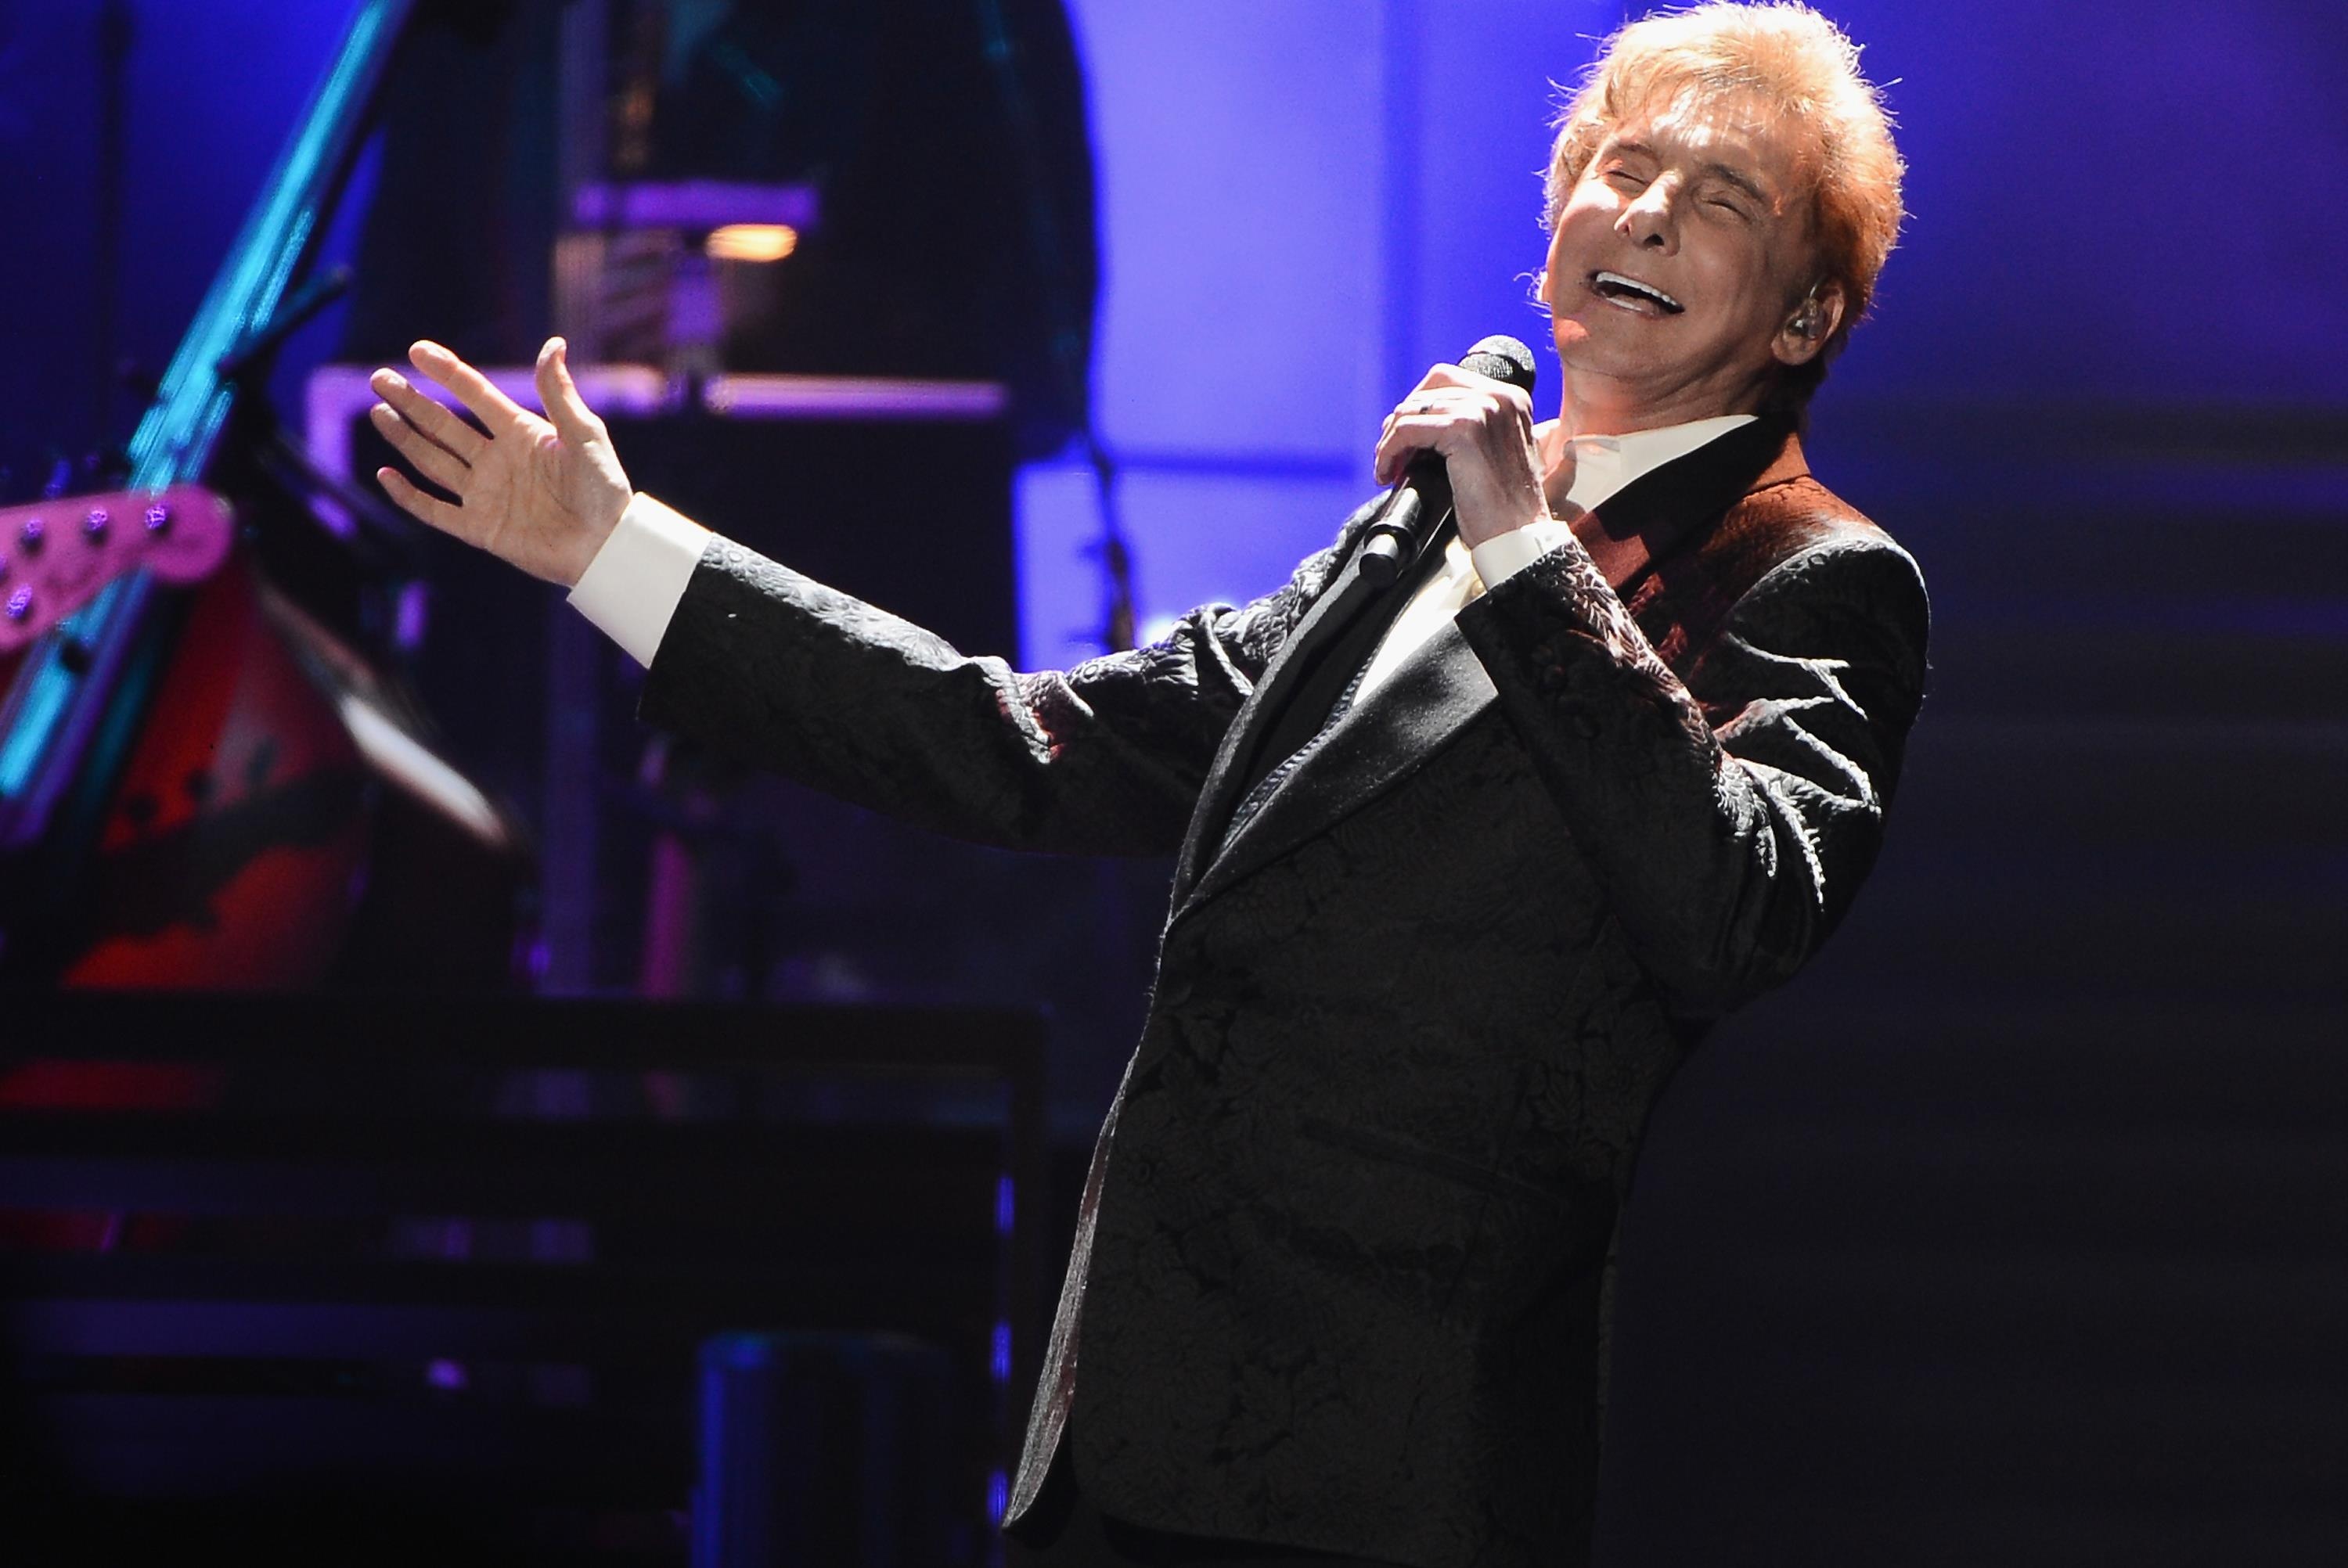 Barry Manilow, Musical legend, Free high-quality images, Iconic performer, 3000x2010 HD Desktop